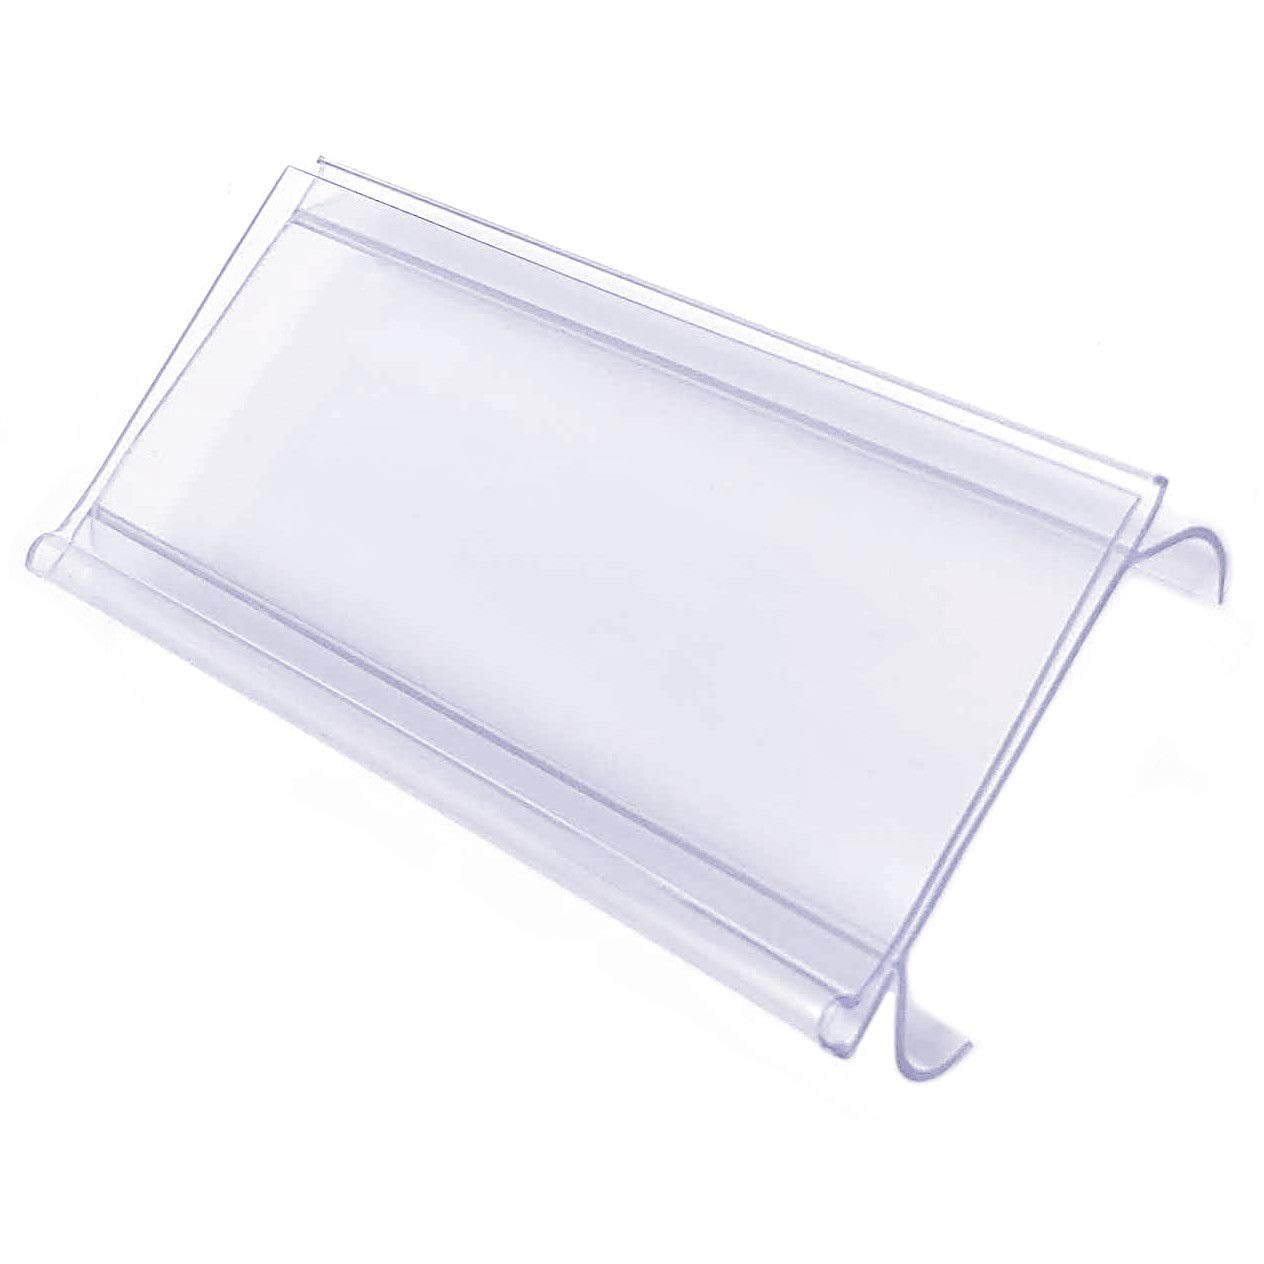 30 PCS Clear Plastic Label Holders for Wire Shelf Retail Price Label 